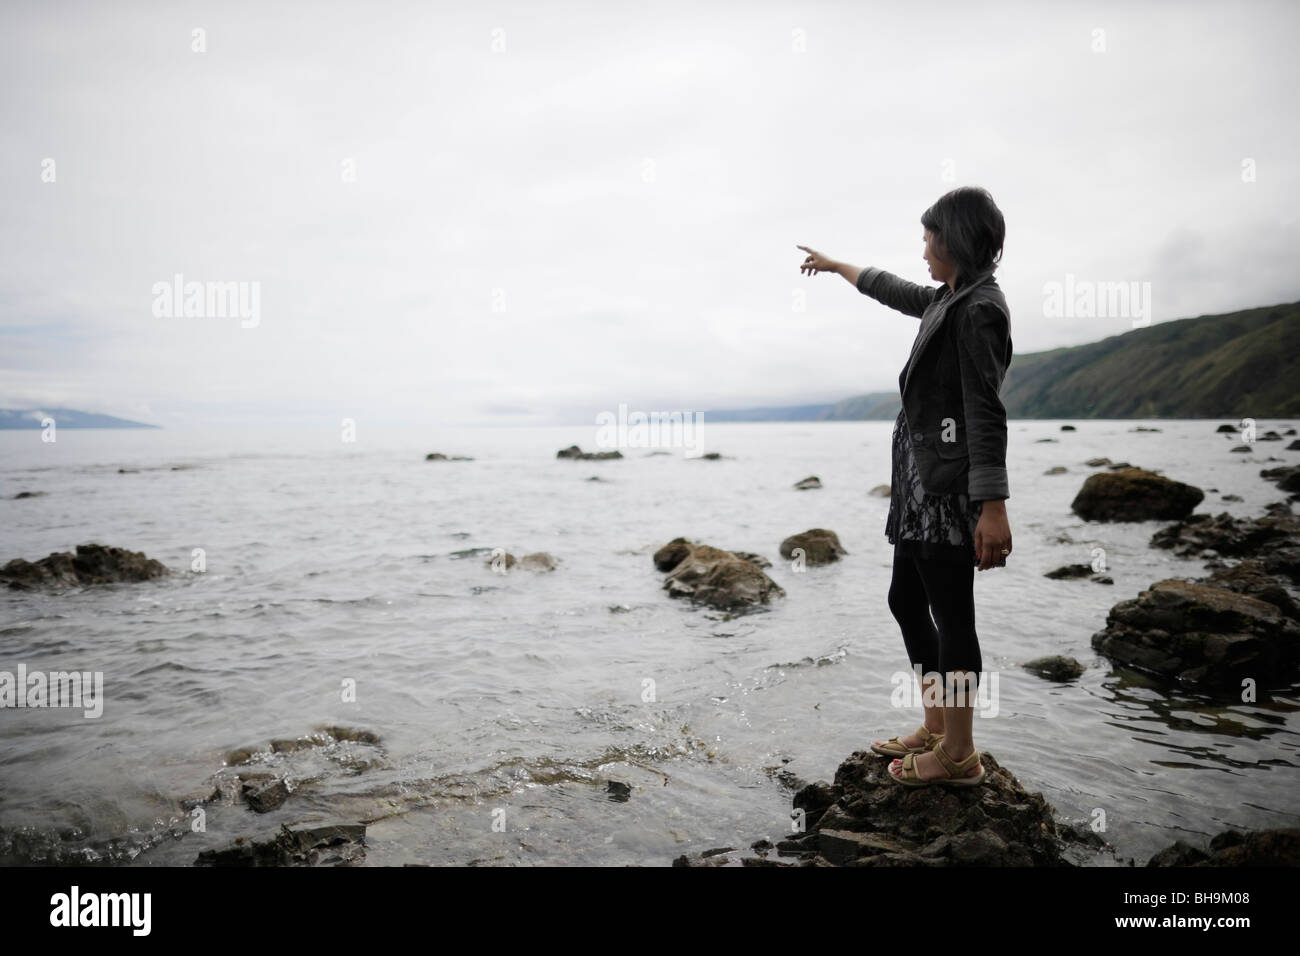 woman on rocky shore pointing out to sea Stock Photo